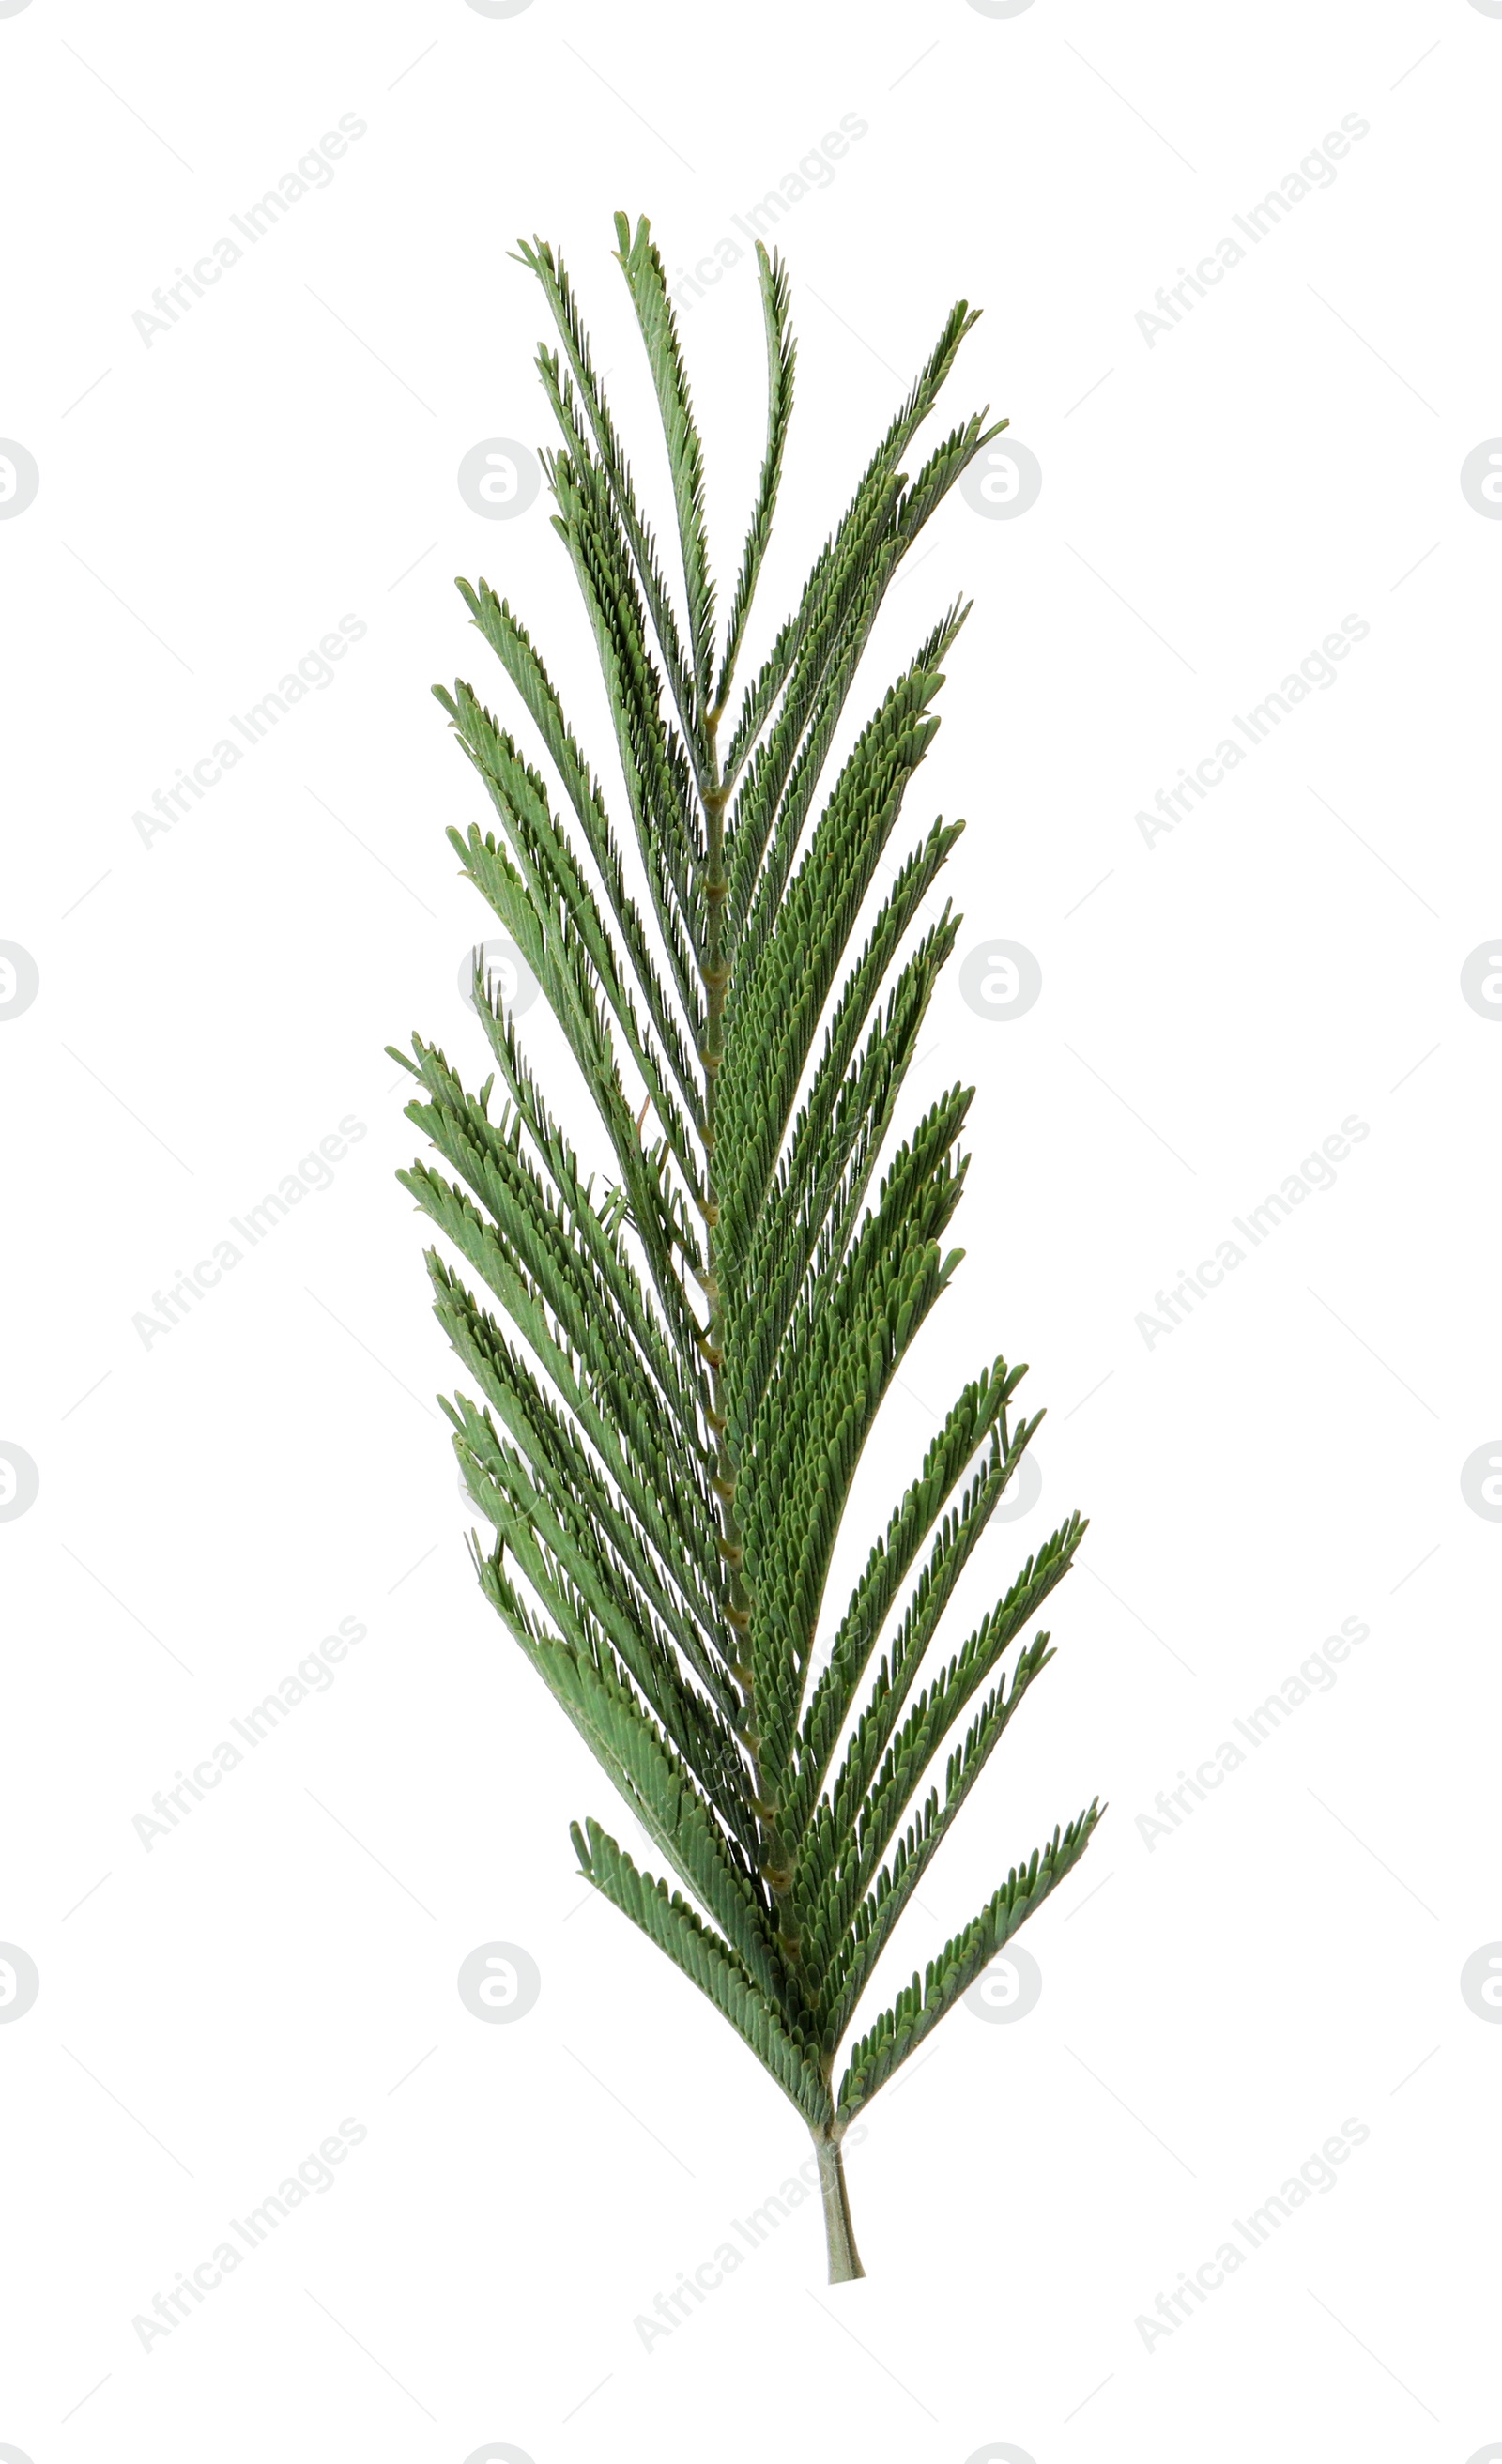 Photo of Green leaf of mimosa plant isolated on white